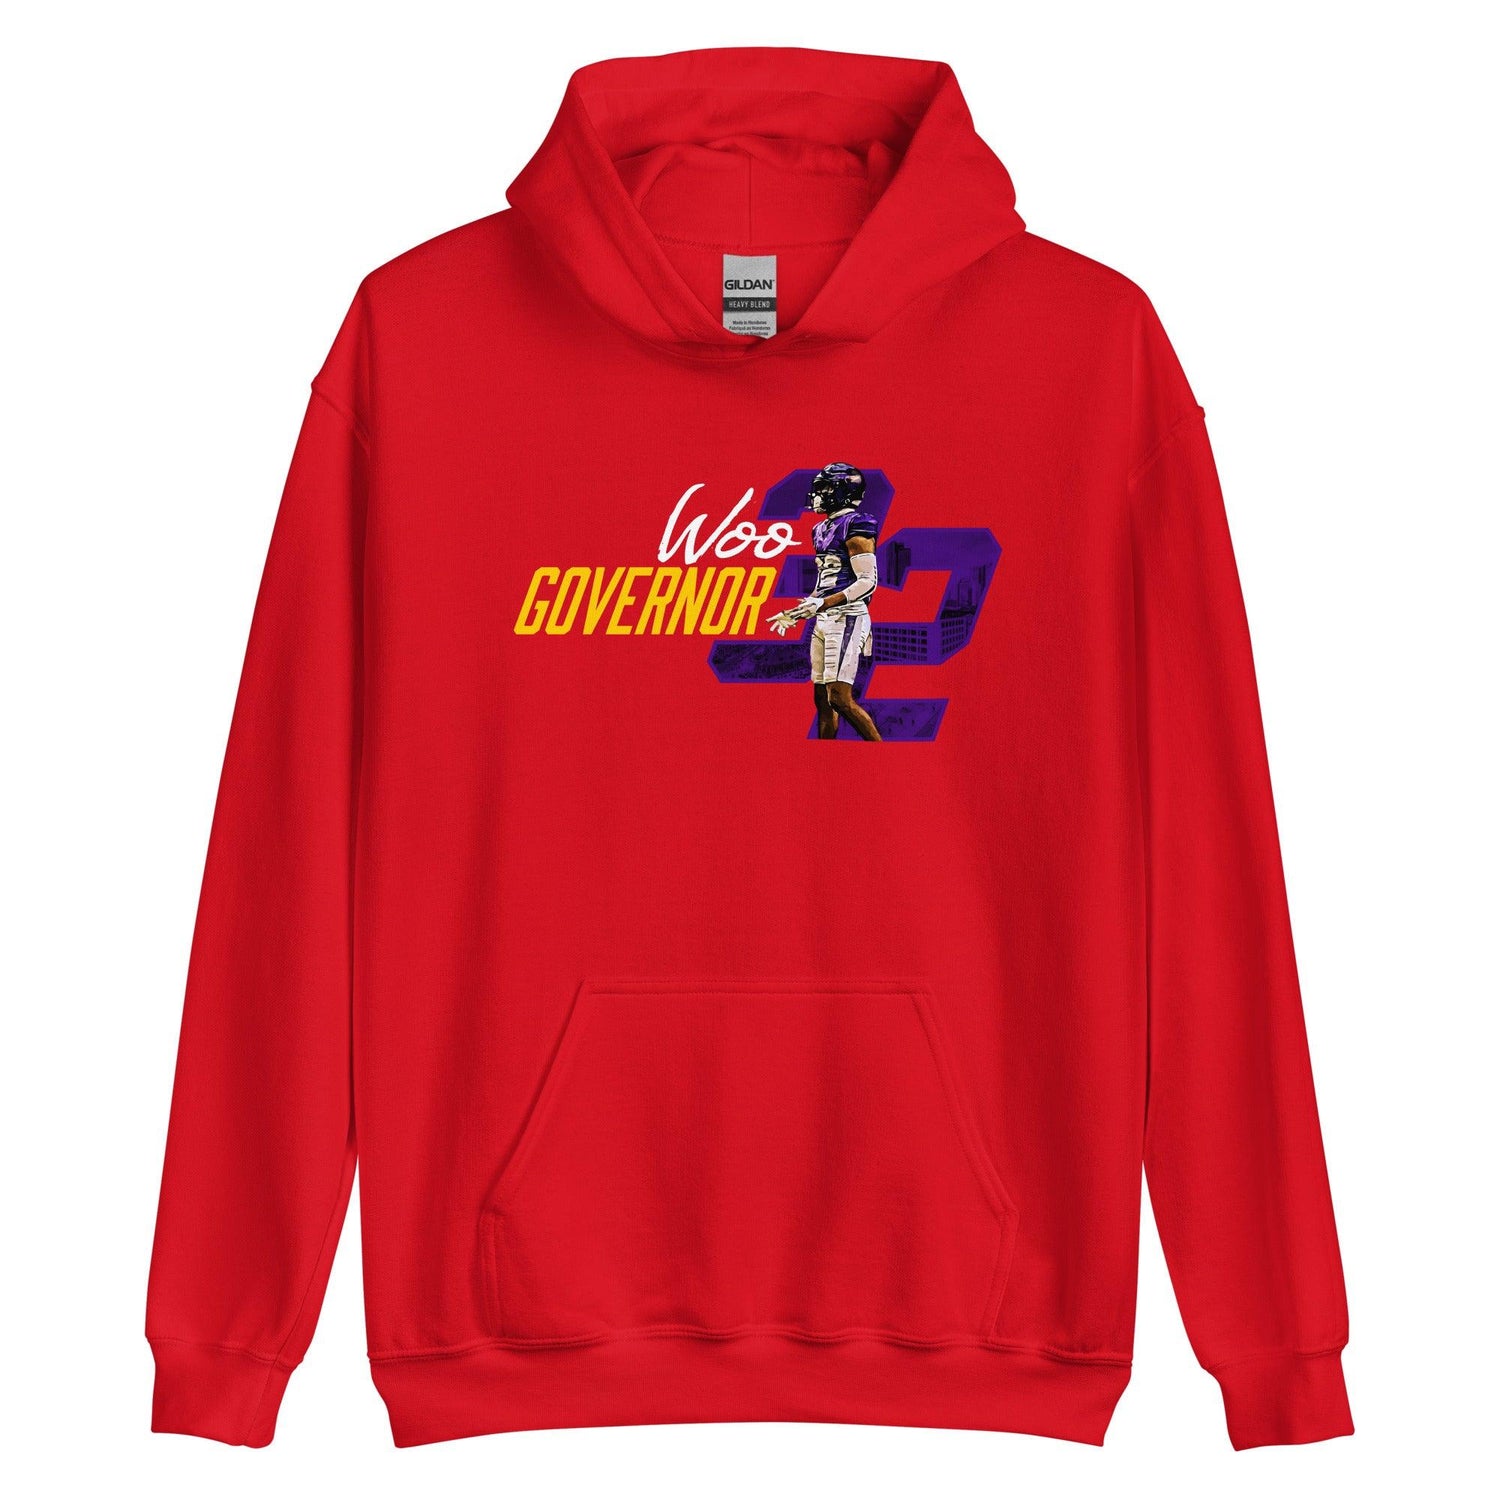 Woo Governor "Overtime" Hoodie - Fan Arch